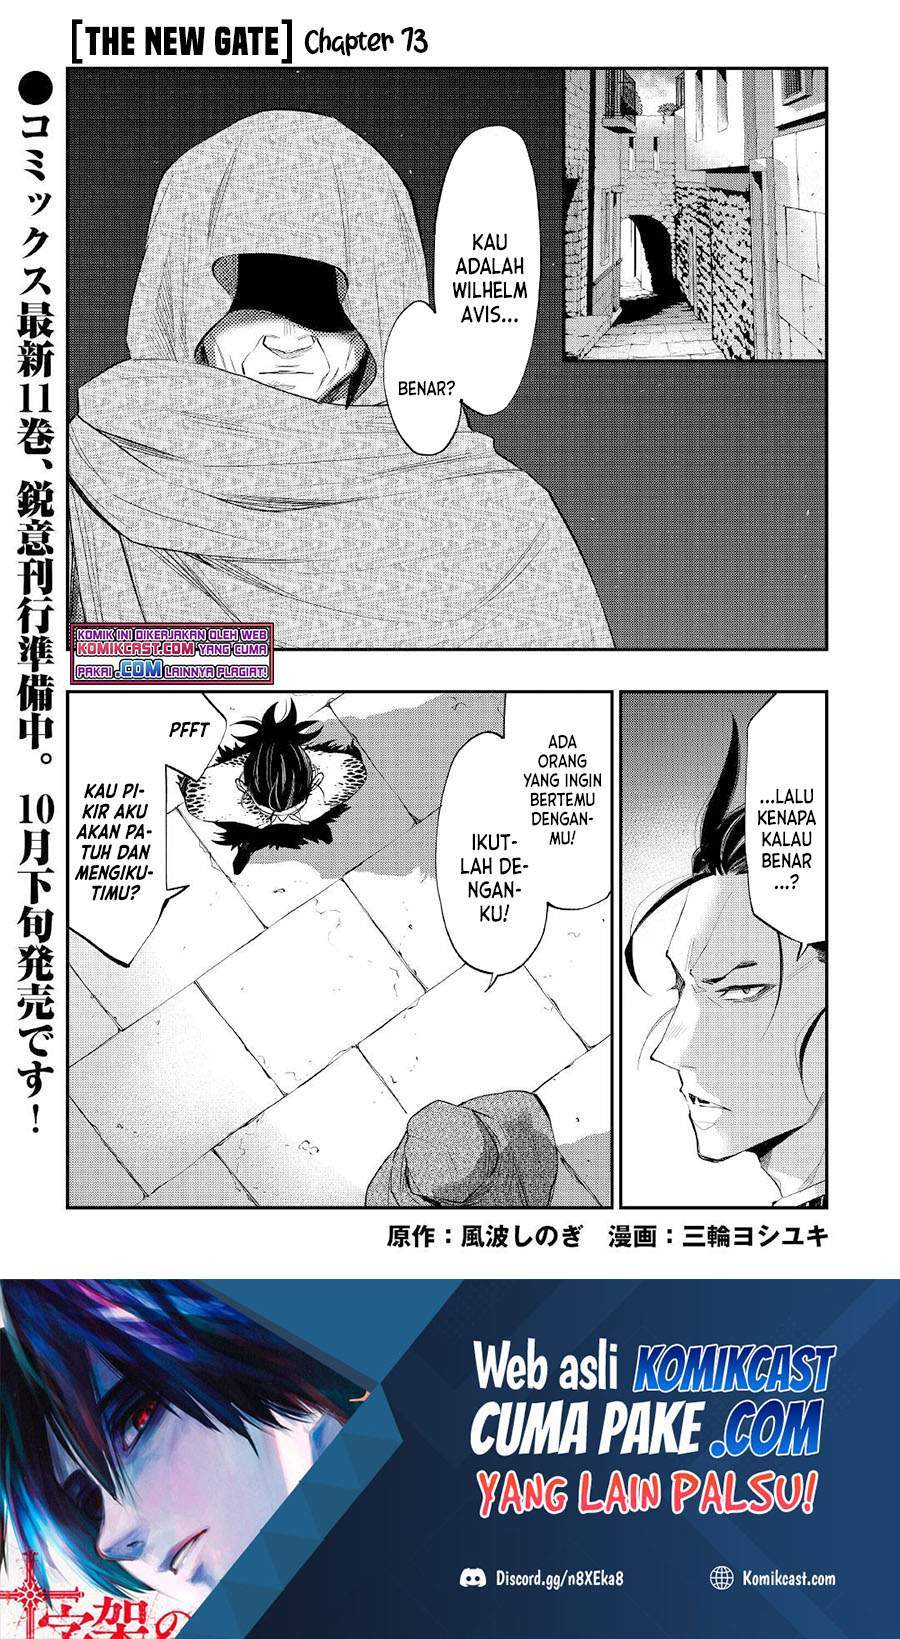 The New Gate Chapter 73 - 159